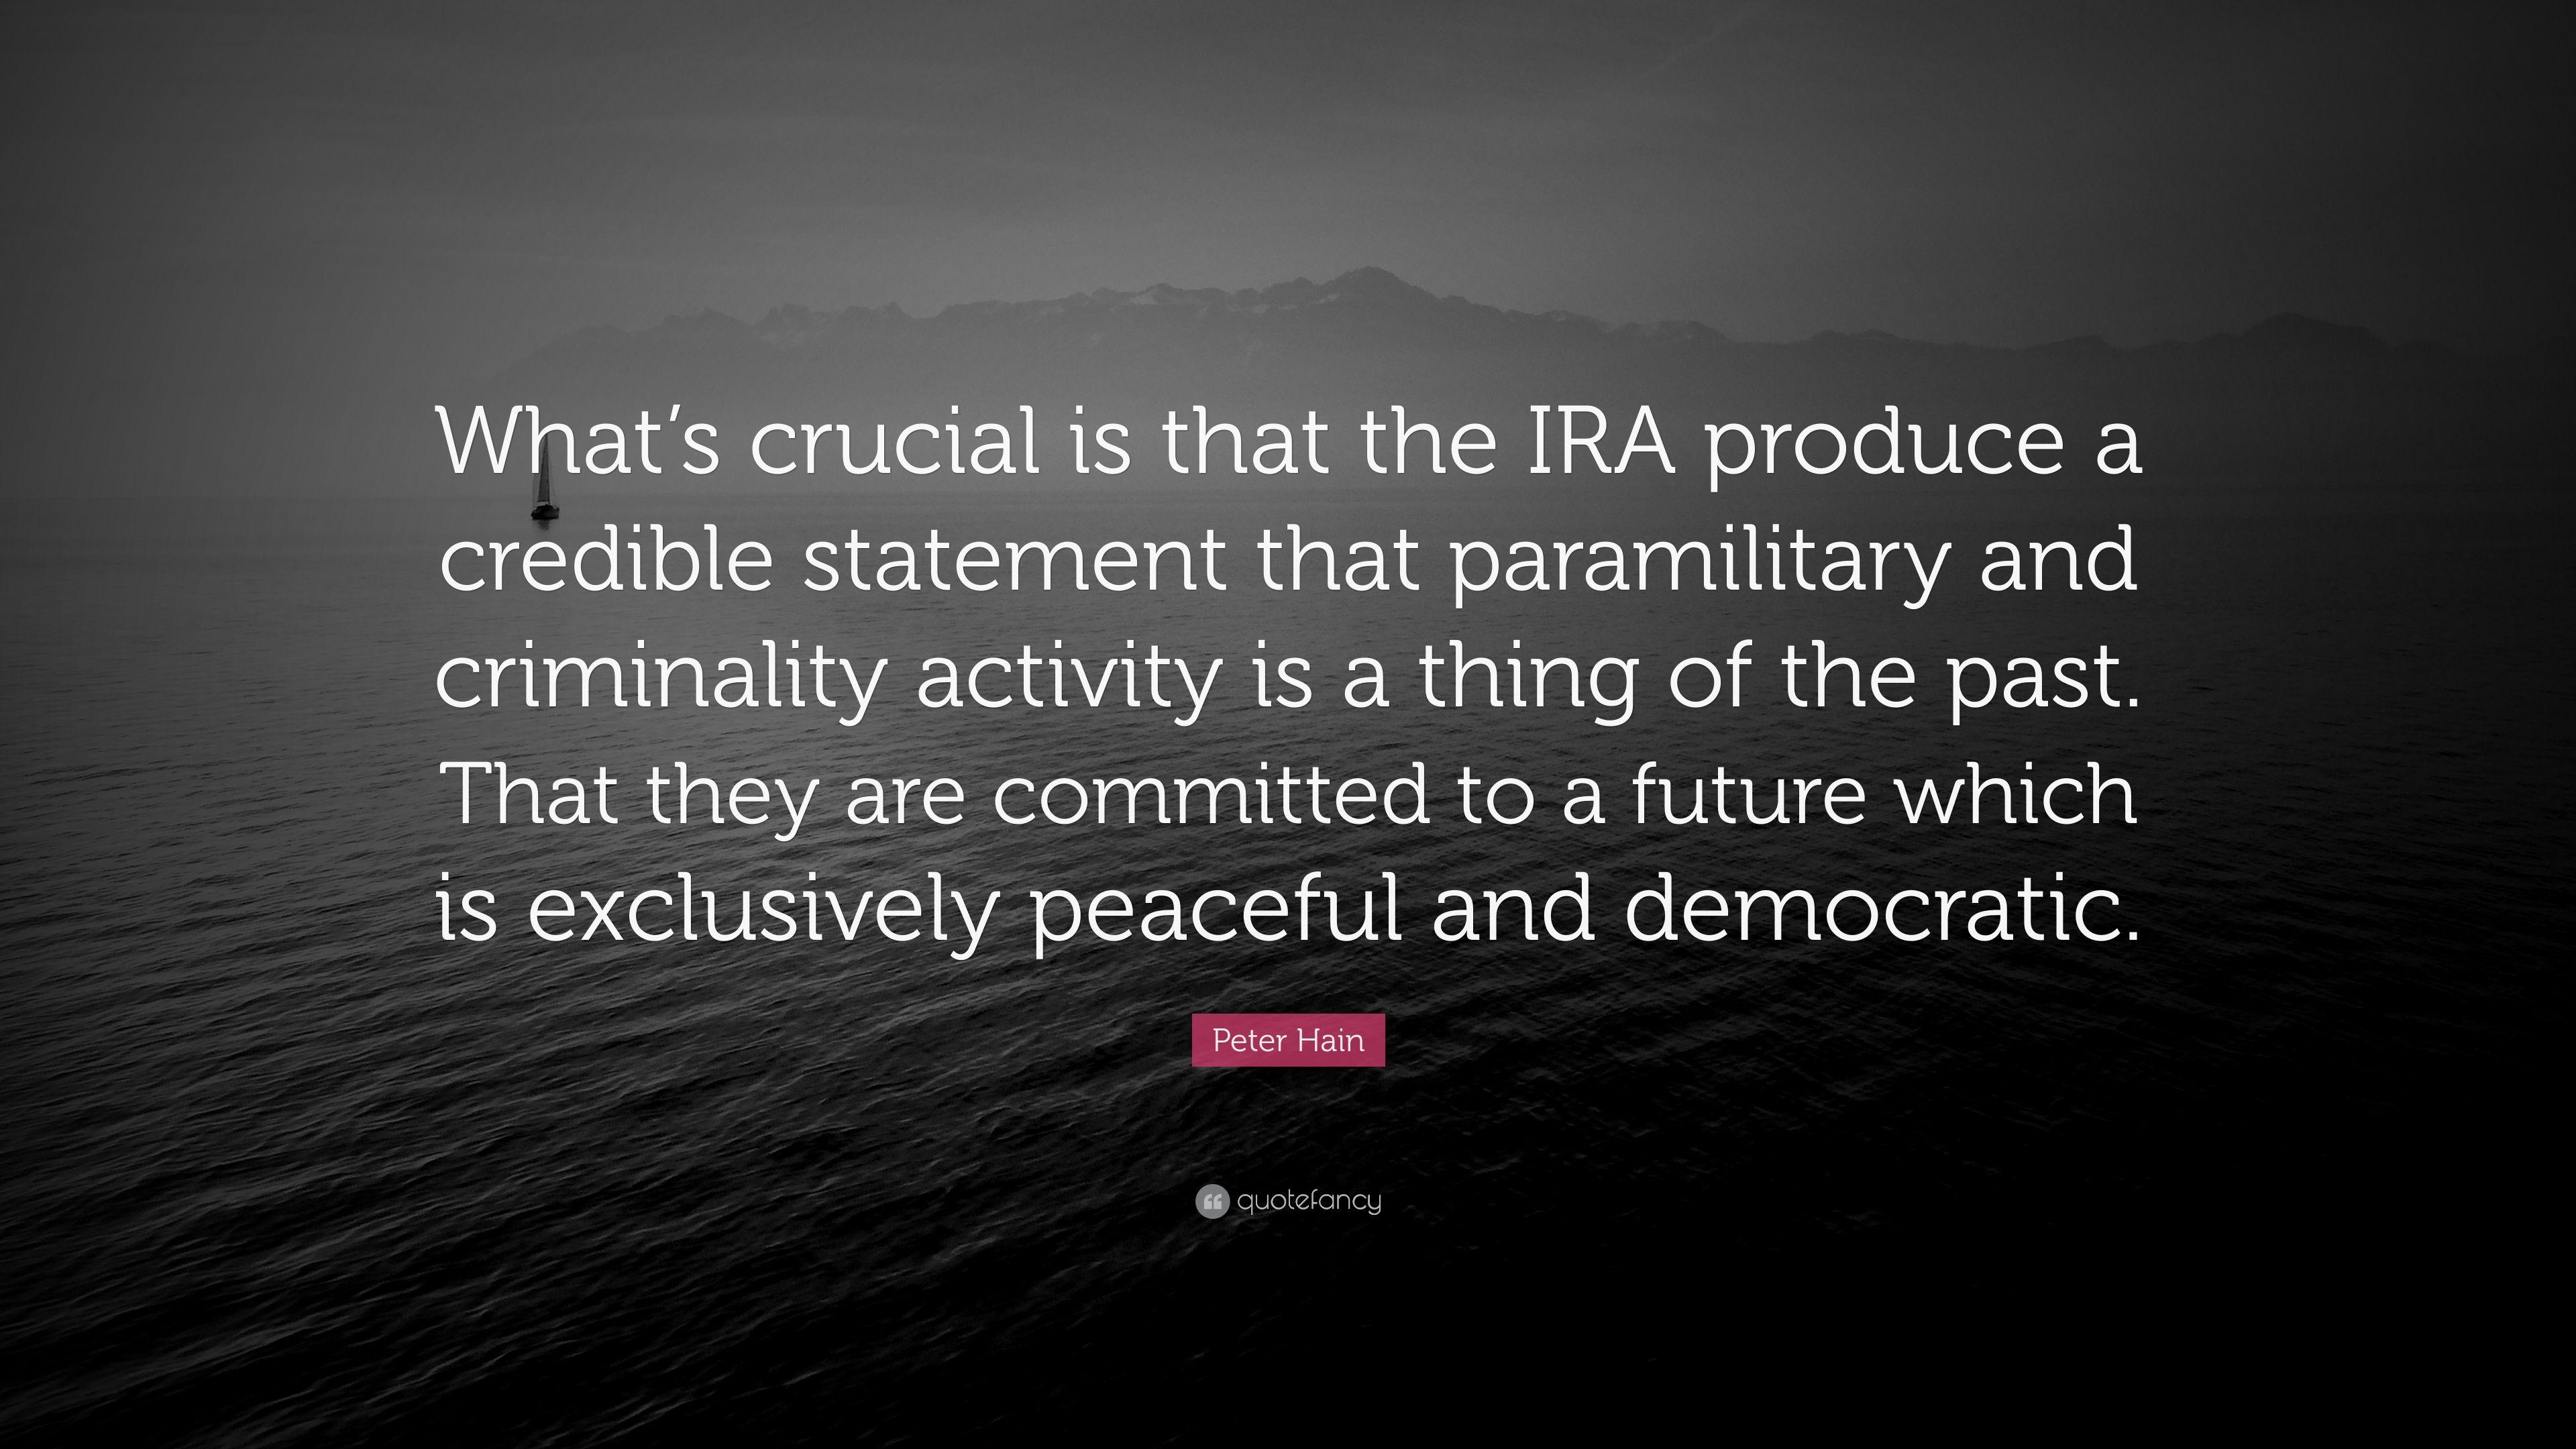 Peter Hain Quote: “What's crucial is that the IRA produce a credible